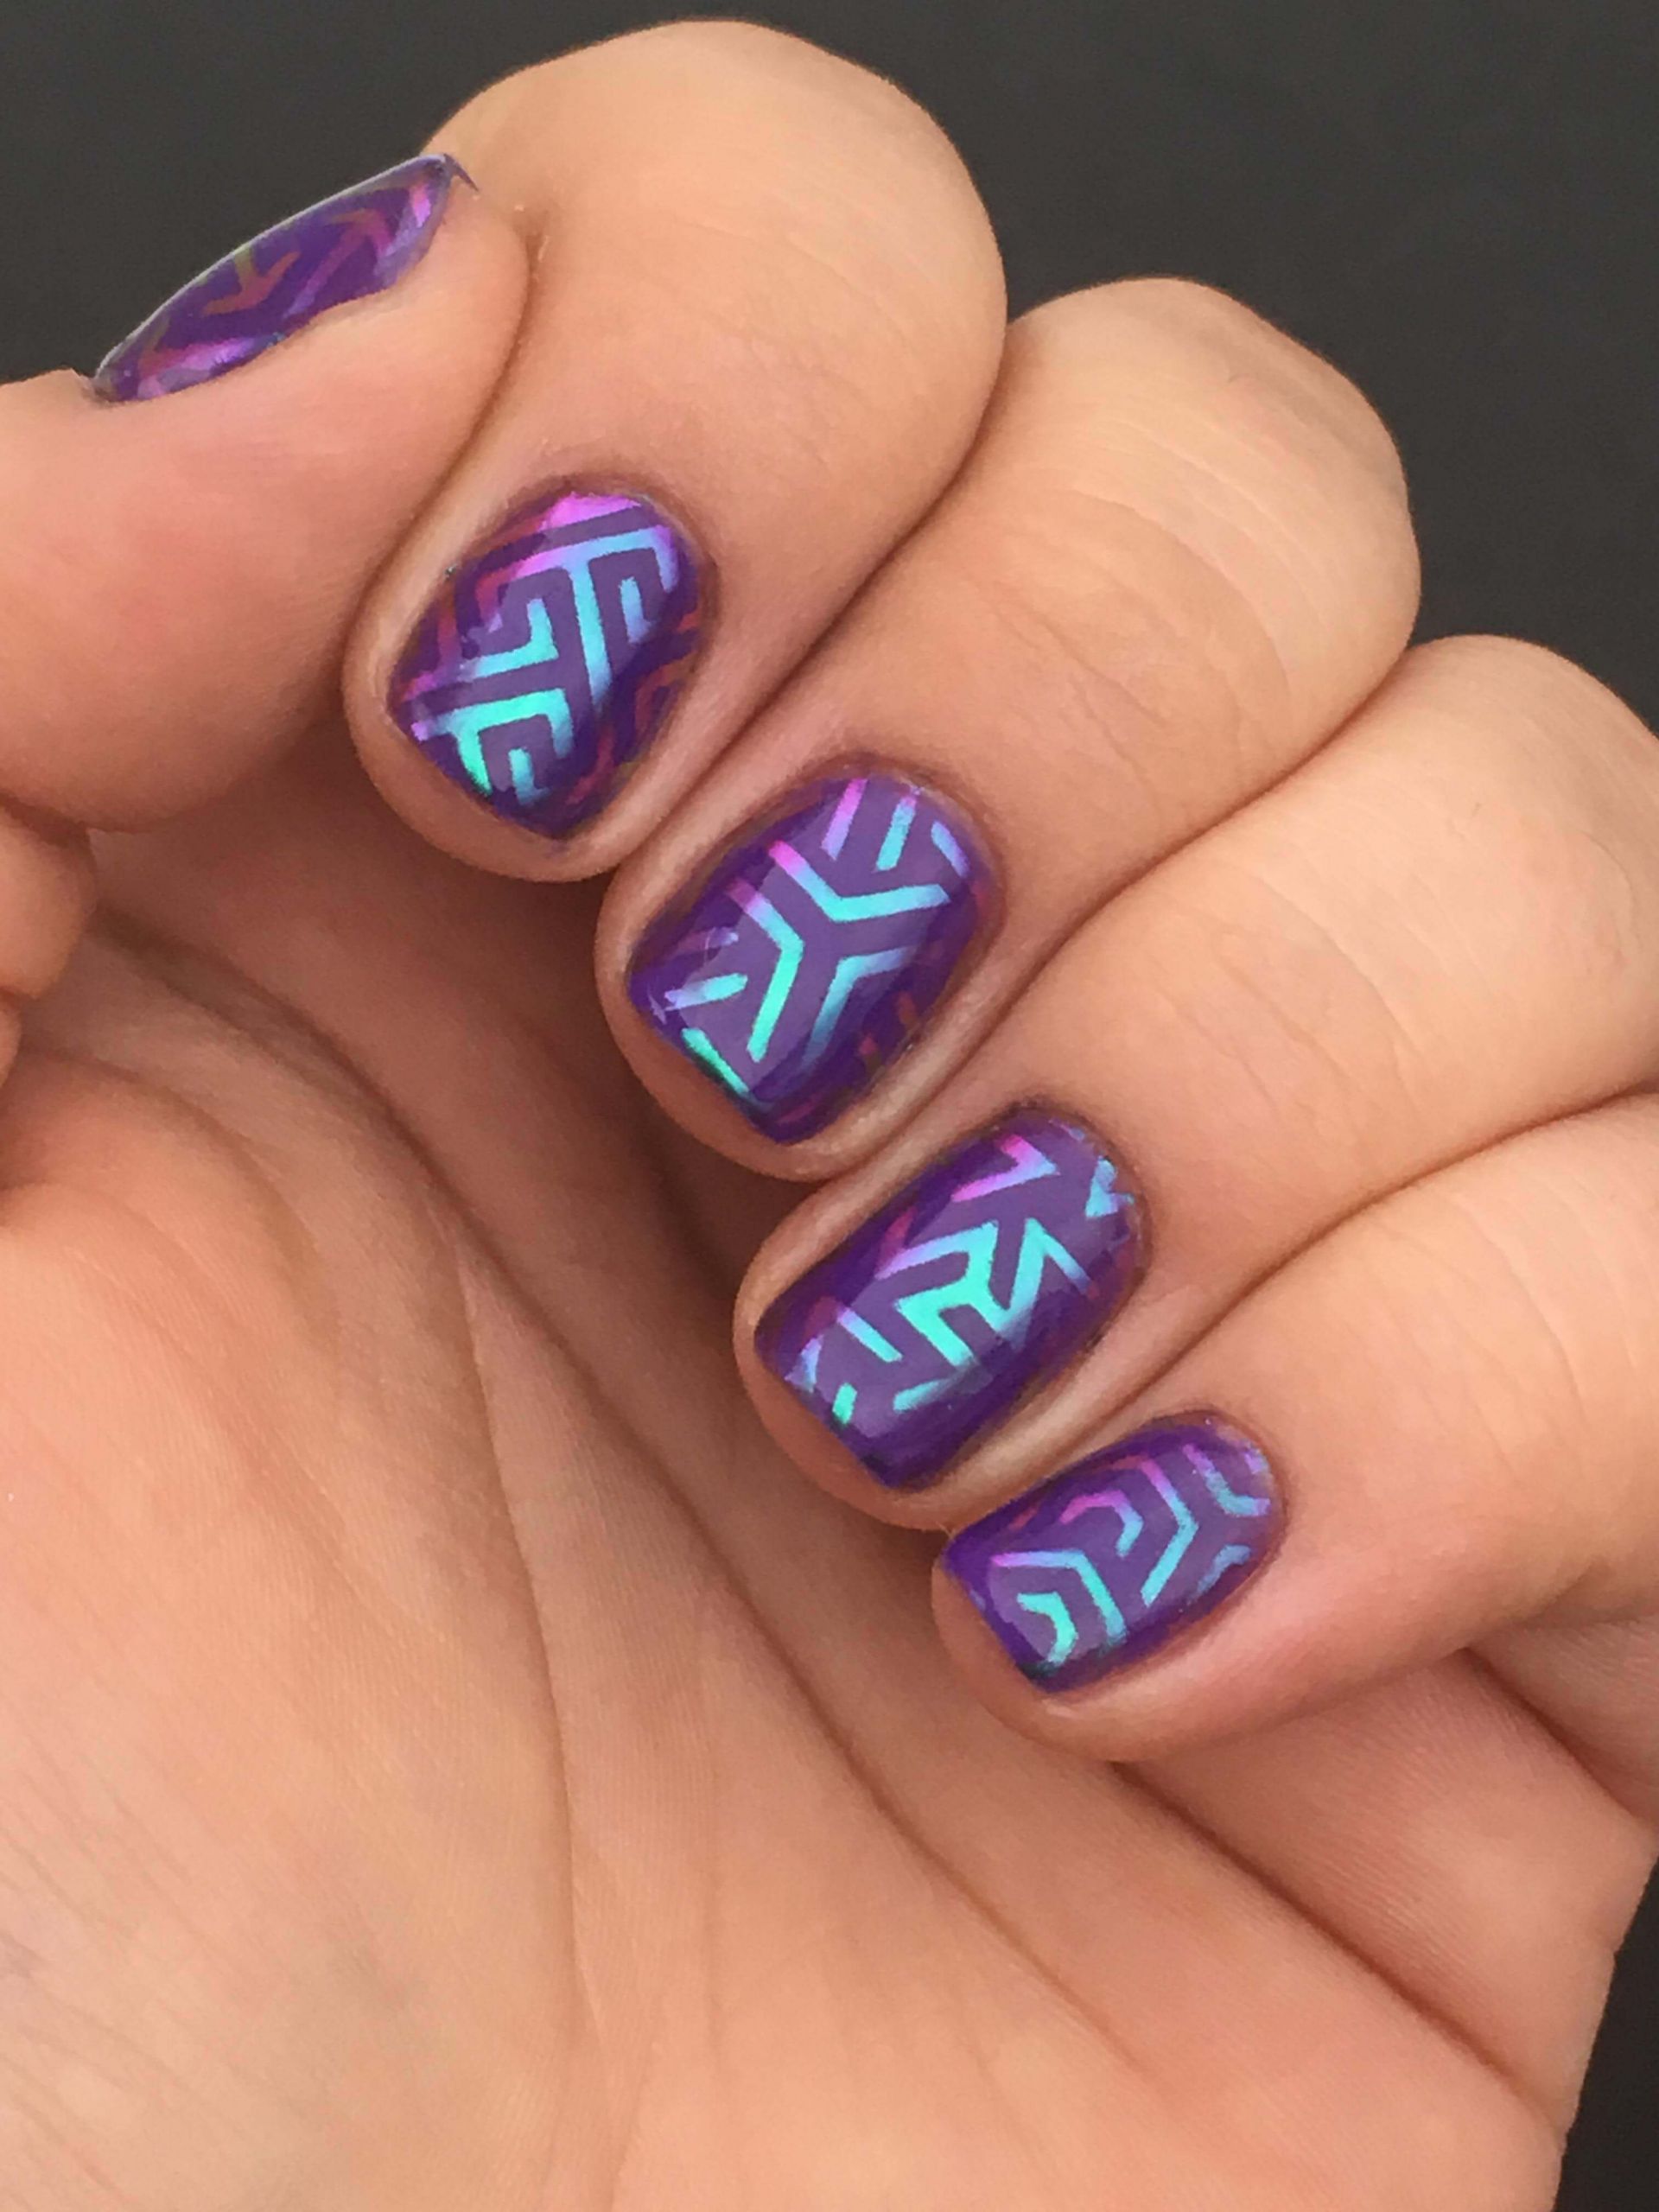 Geometric Nail Designs
 Learn How To Make This Cool Geometric Nail Art With